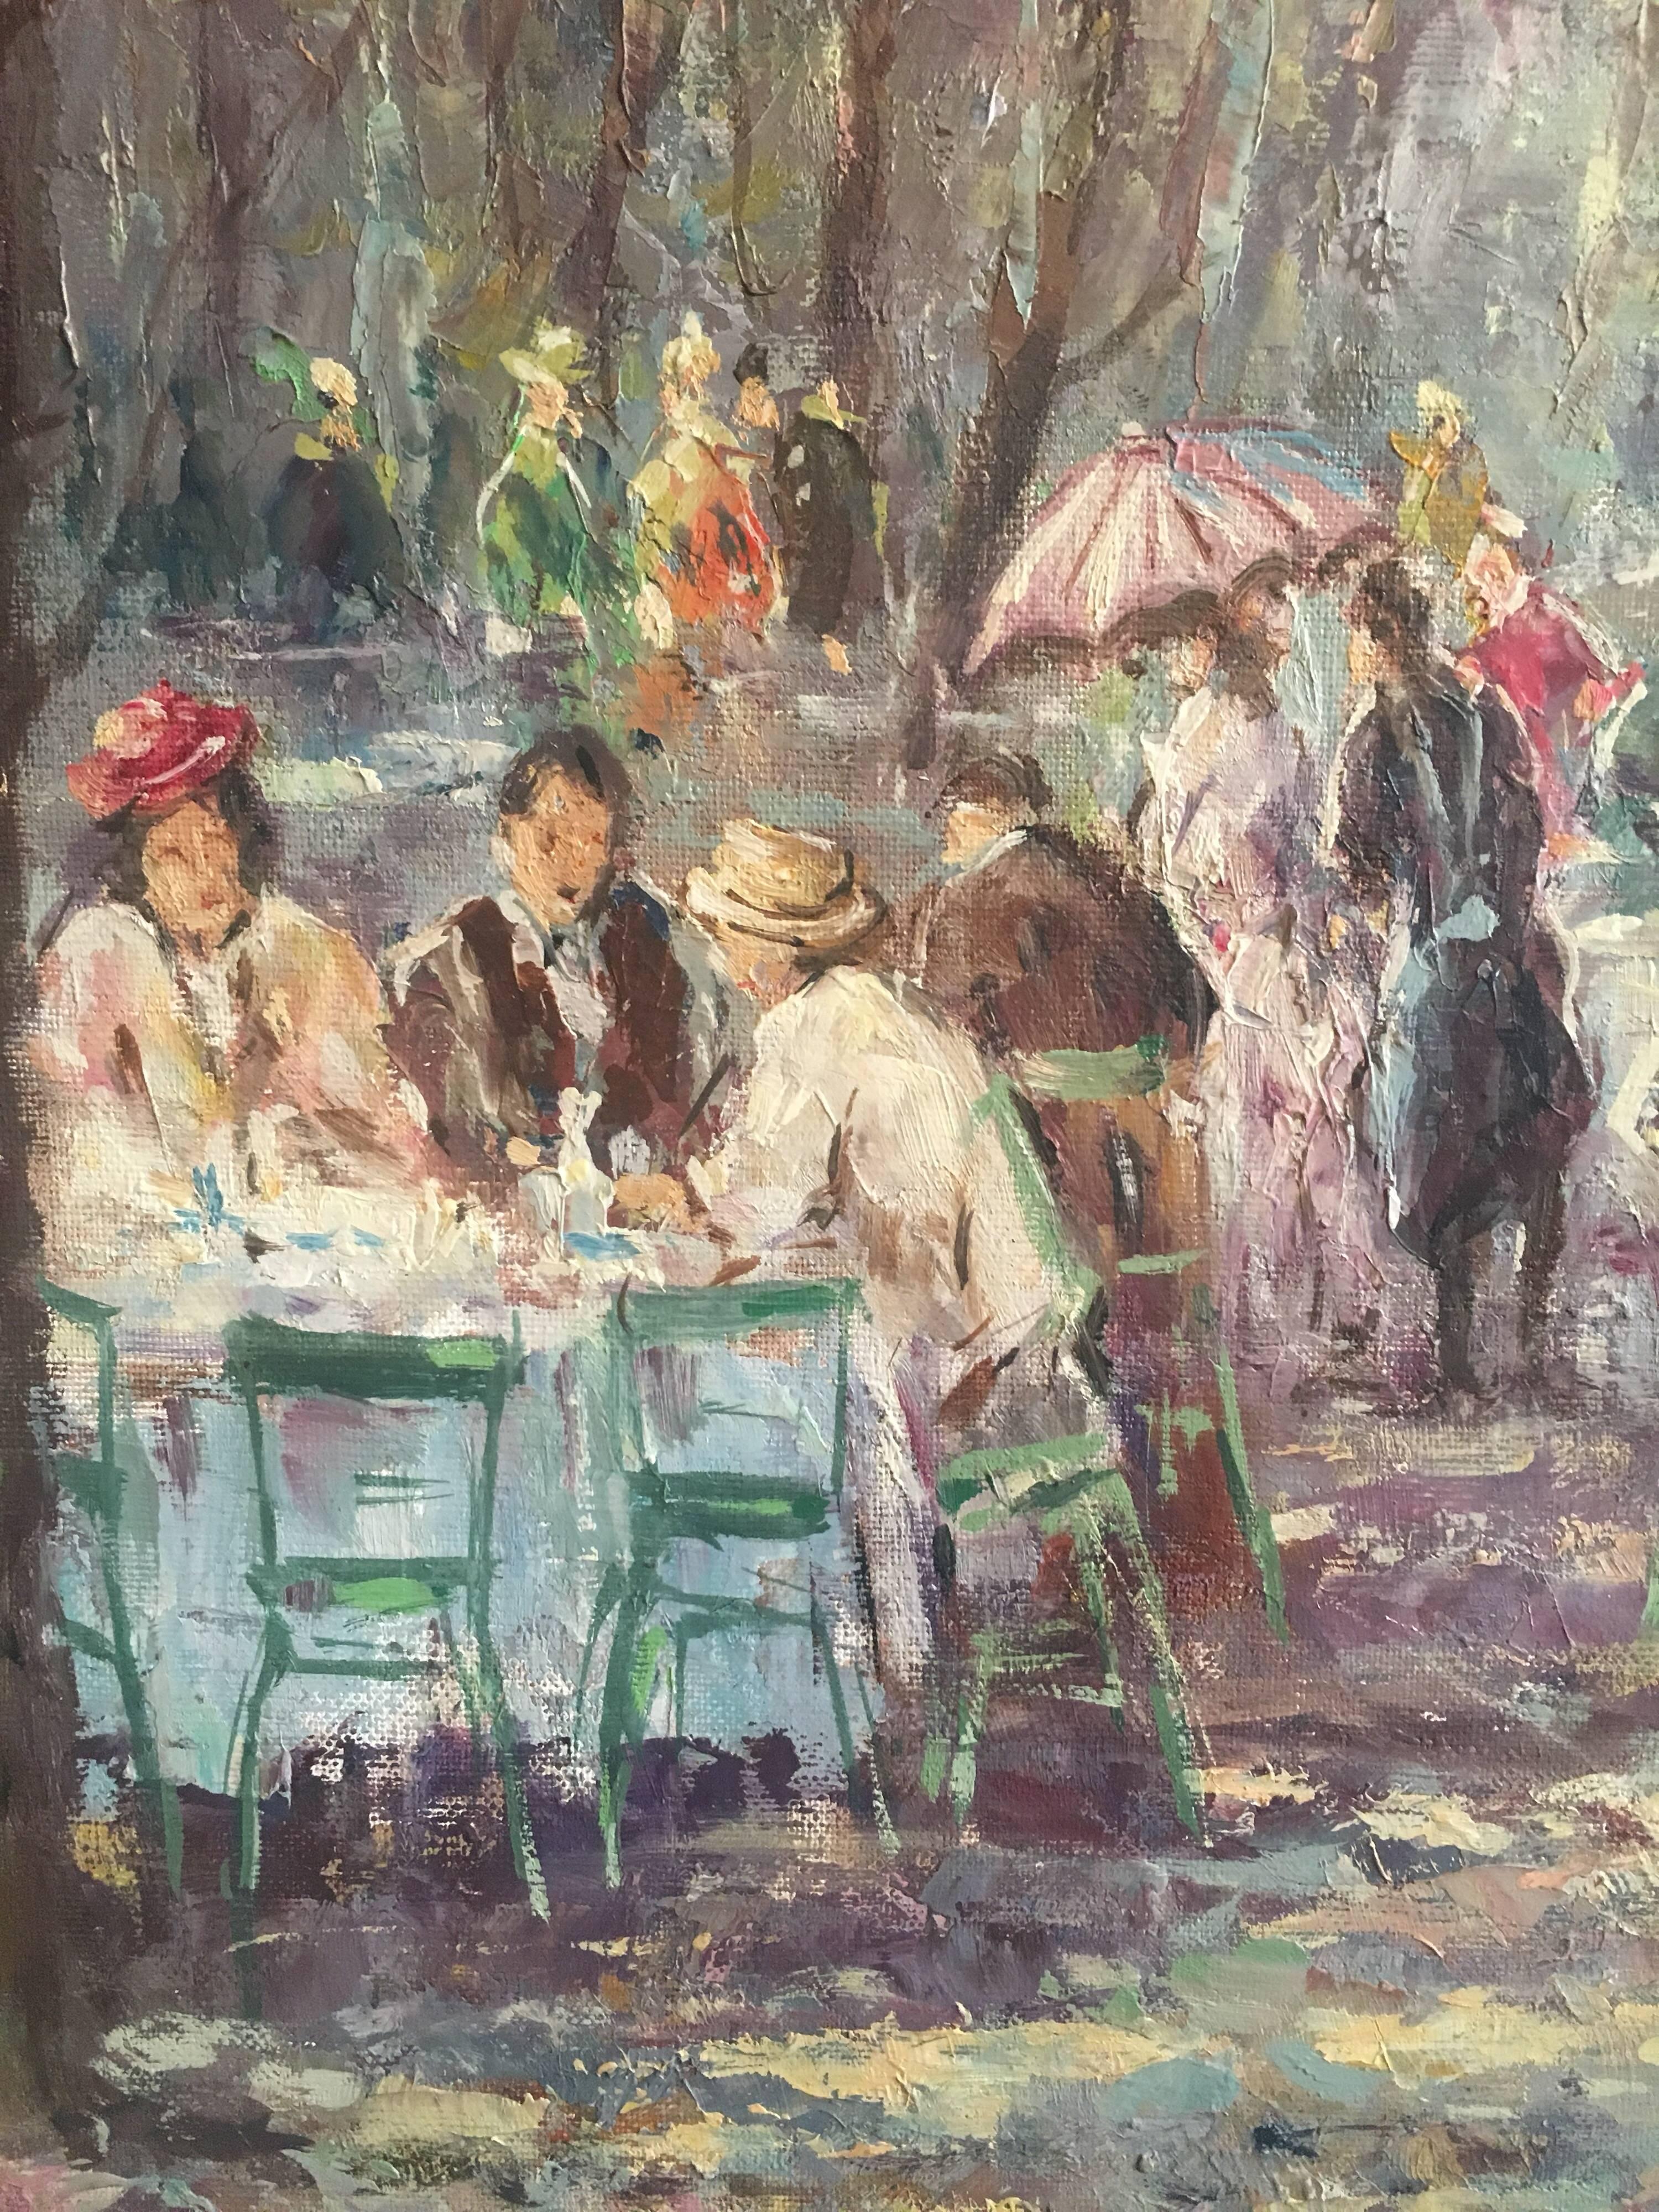 Figures in Busy Park Cafe Scene, Signed Oil Painting - Brown Landscape Painting by Unknown